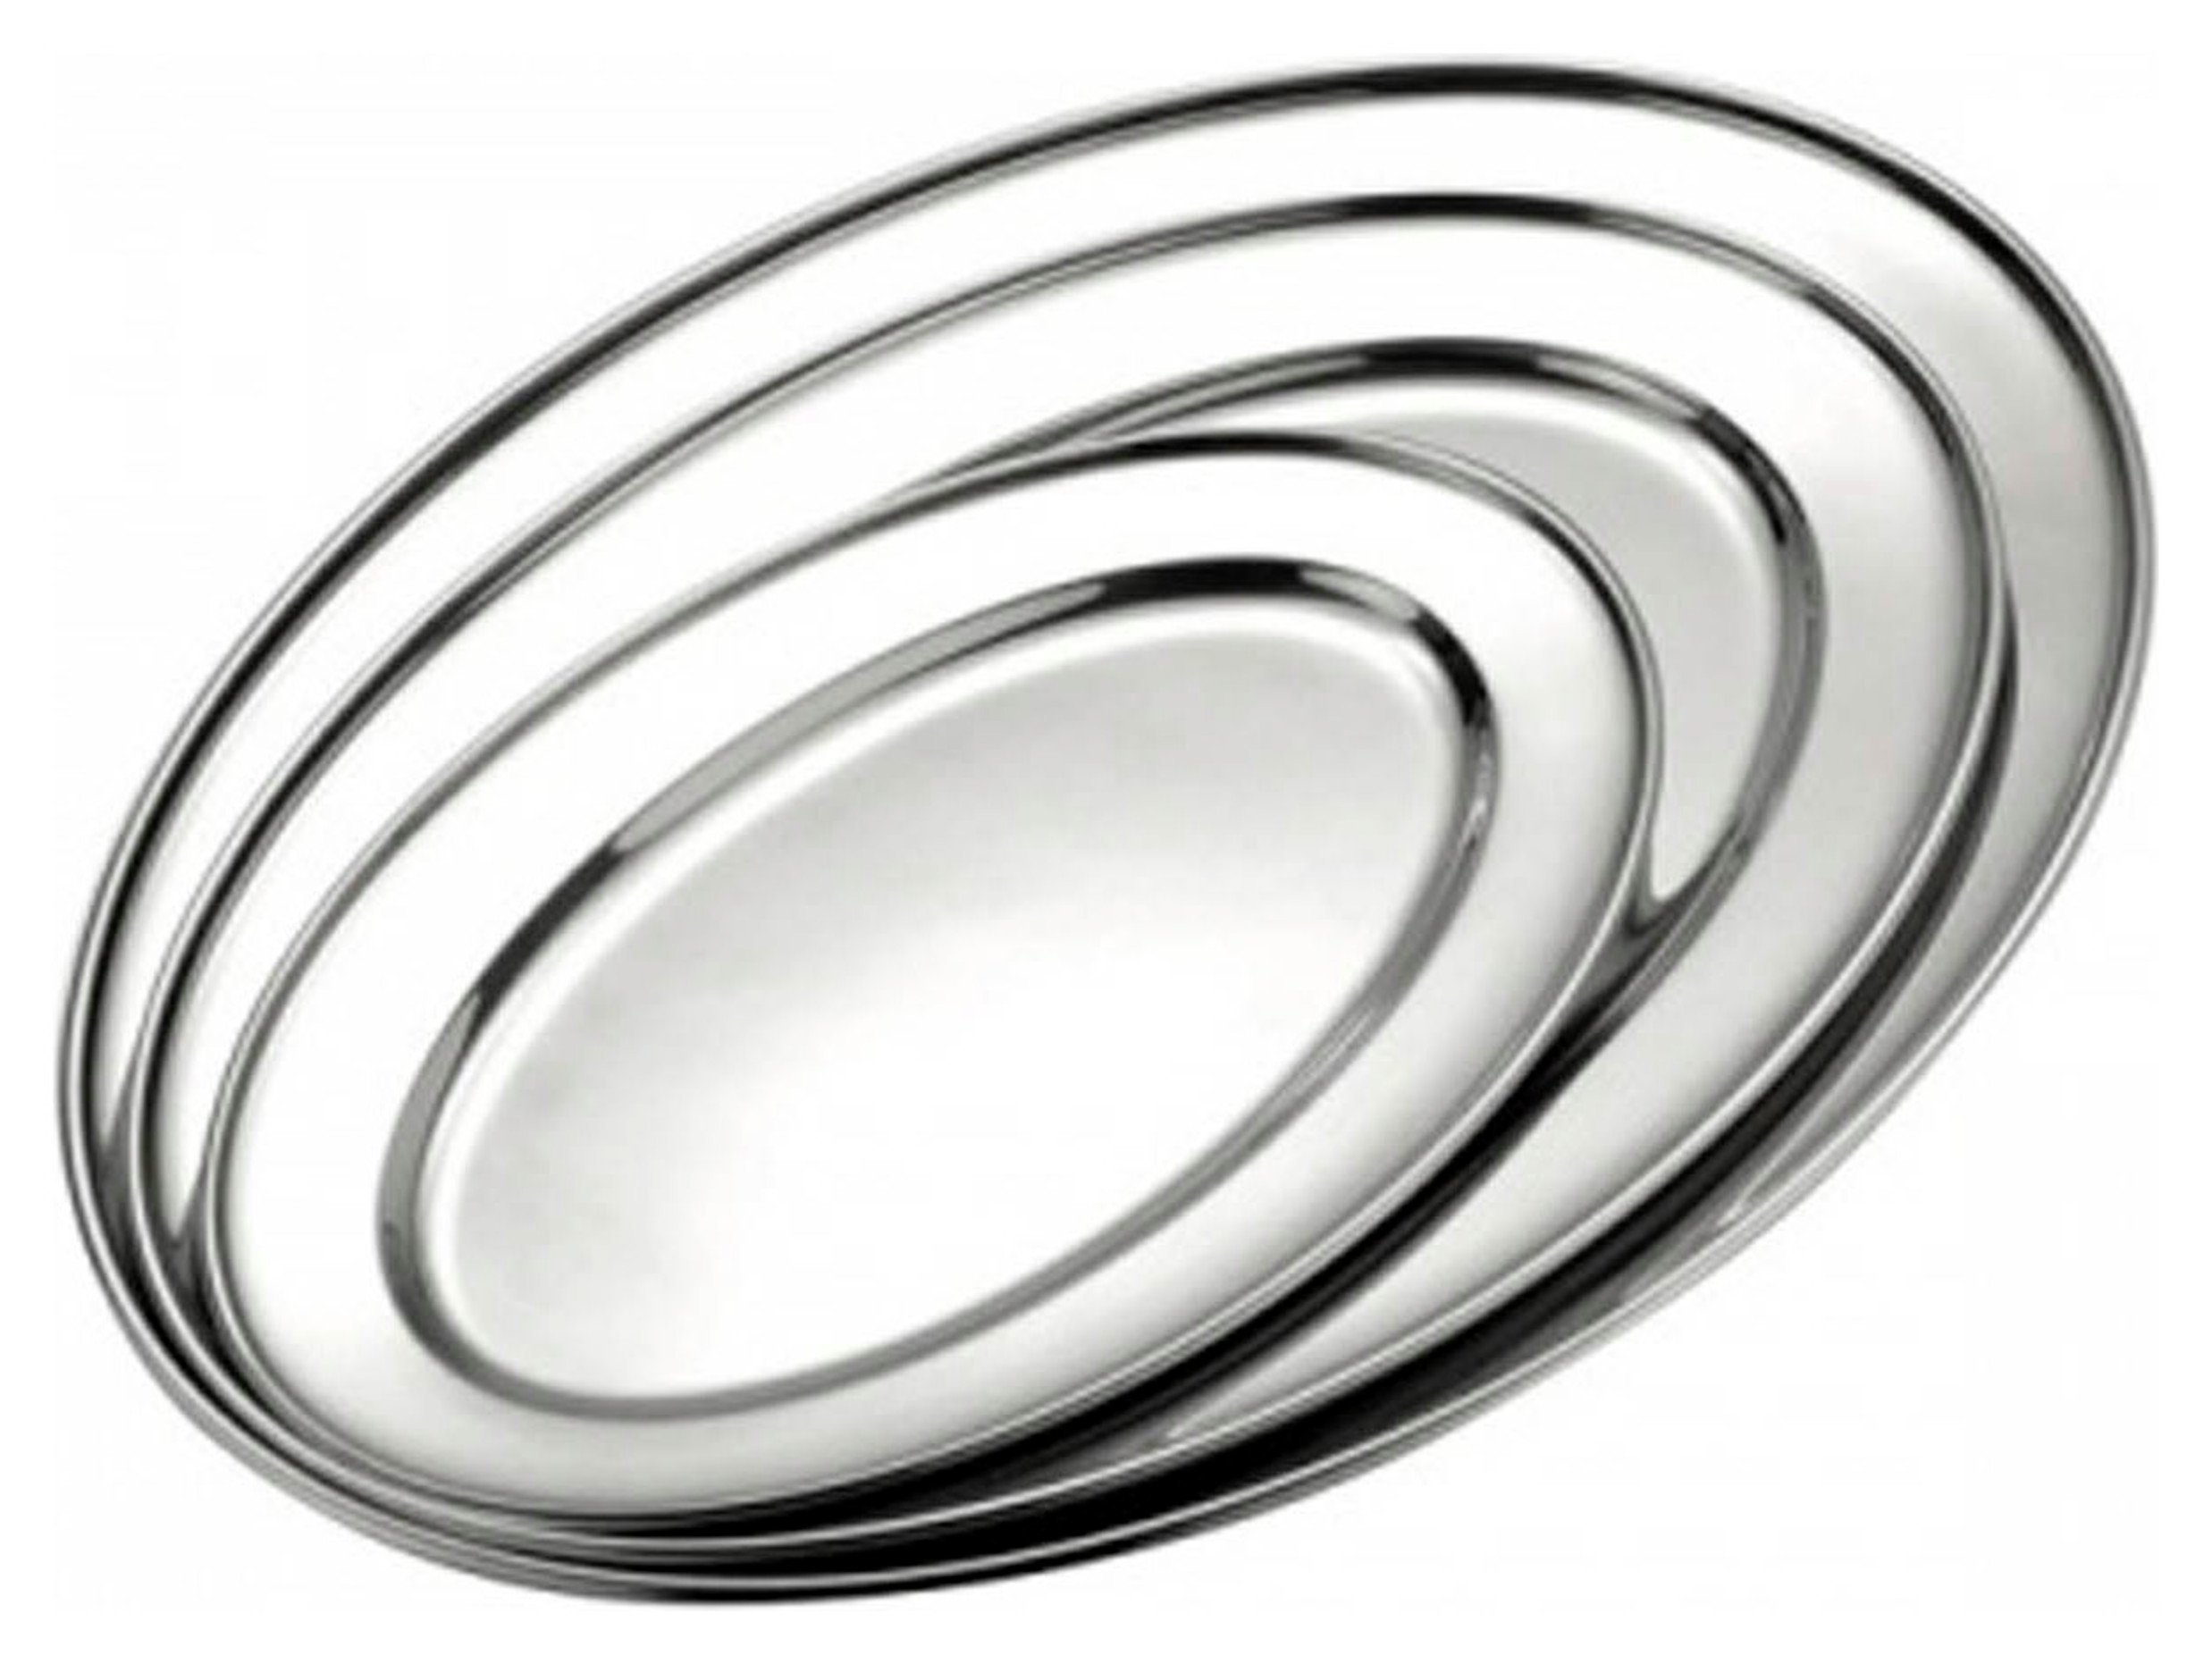 Zodiac Oval Serving Dish - Stainless Steel